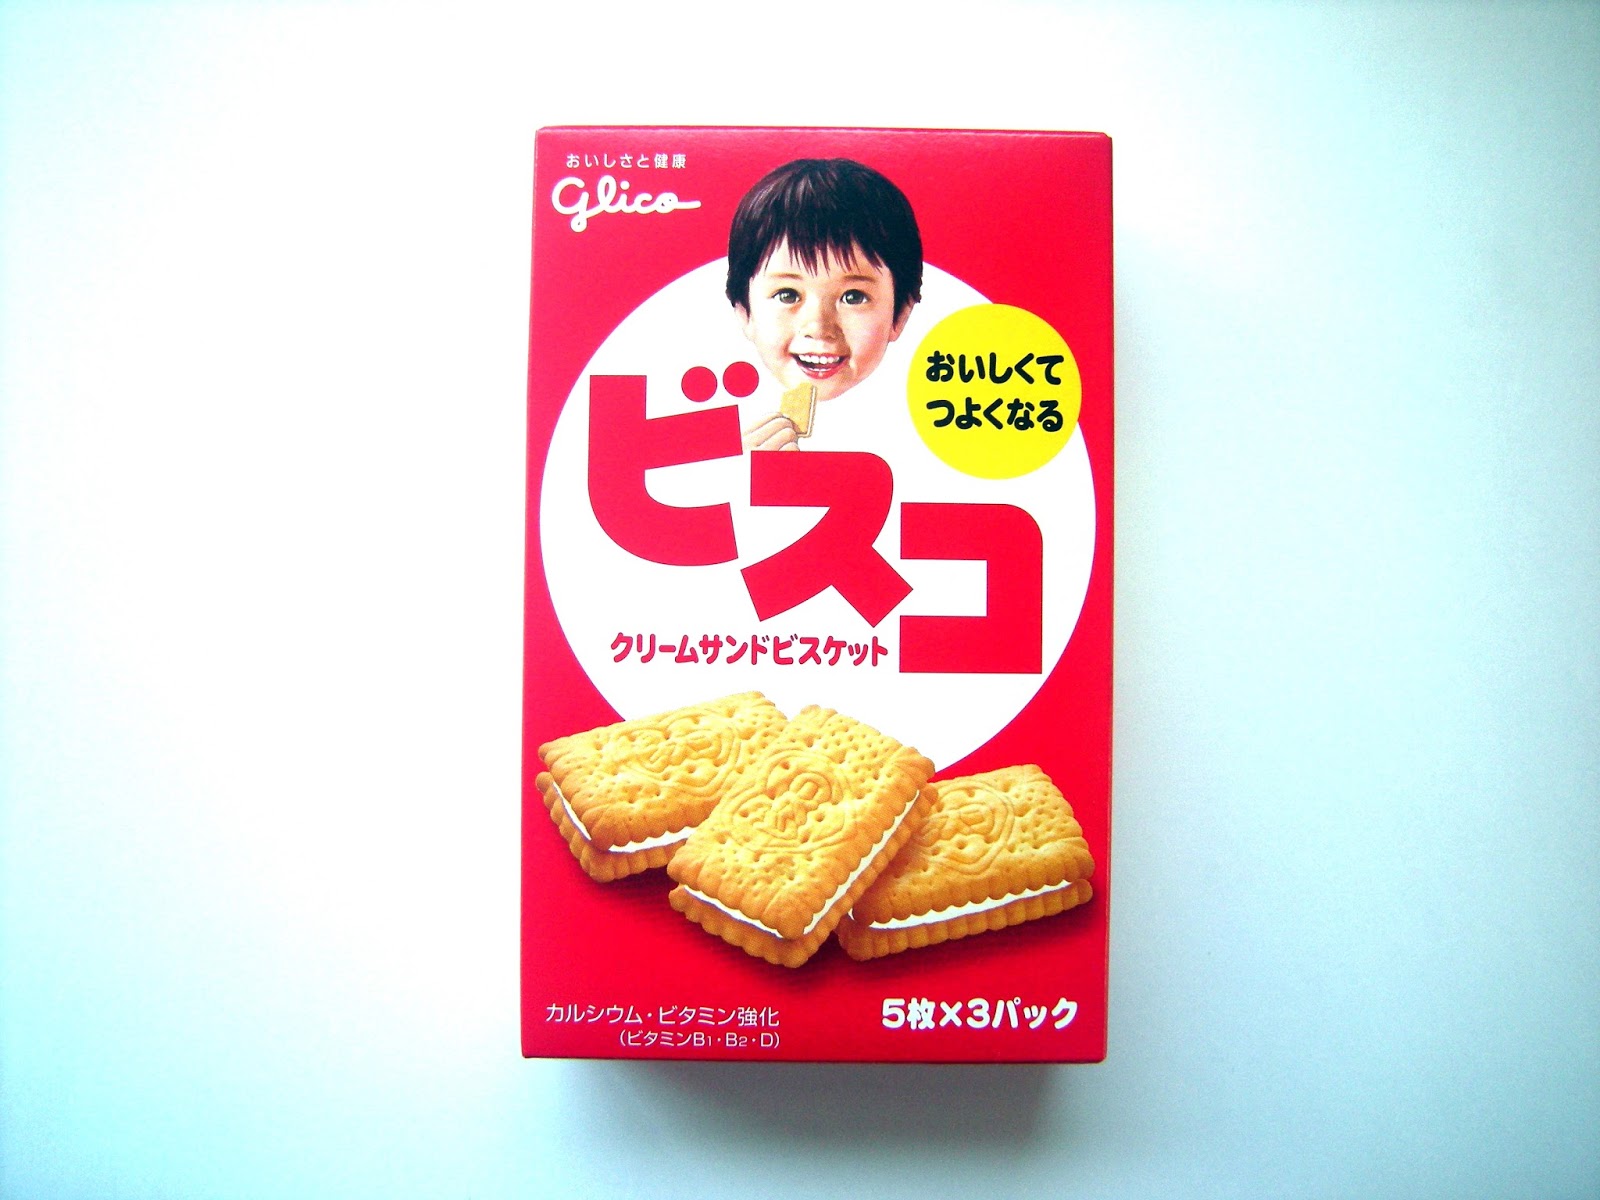 Vegetarian Shopping Guide in Japan: Biscuit: glico "bisco"